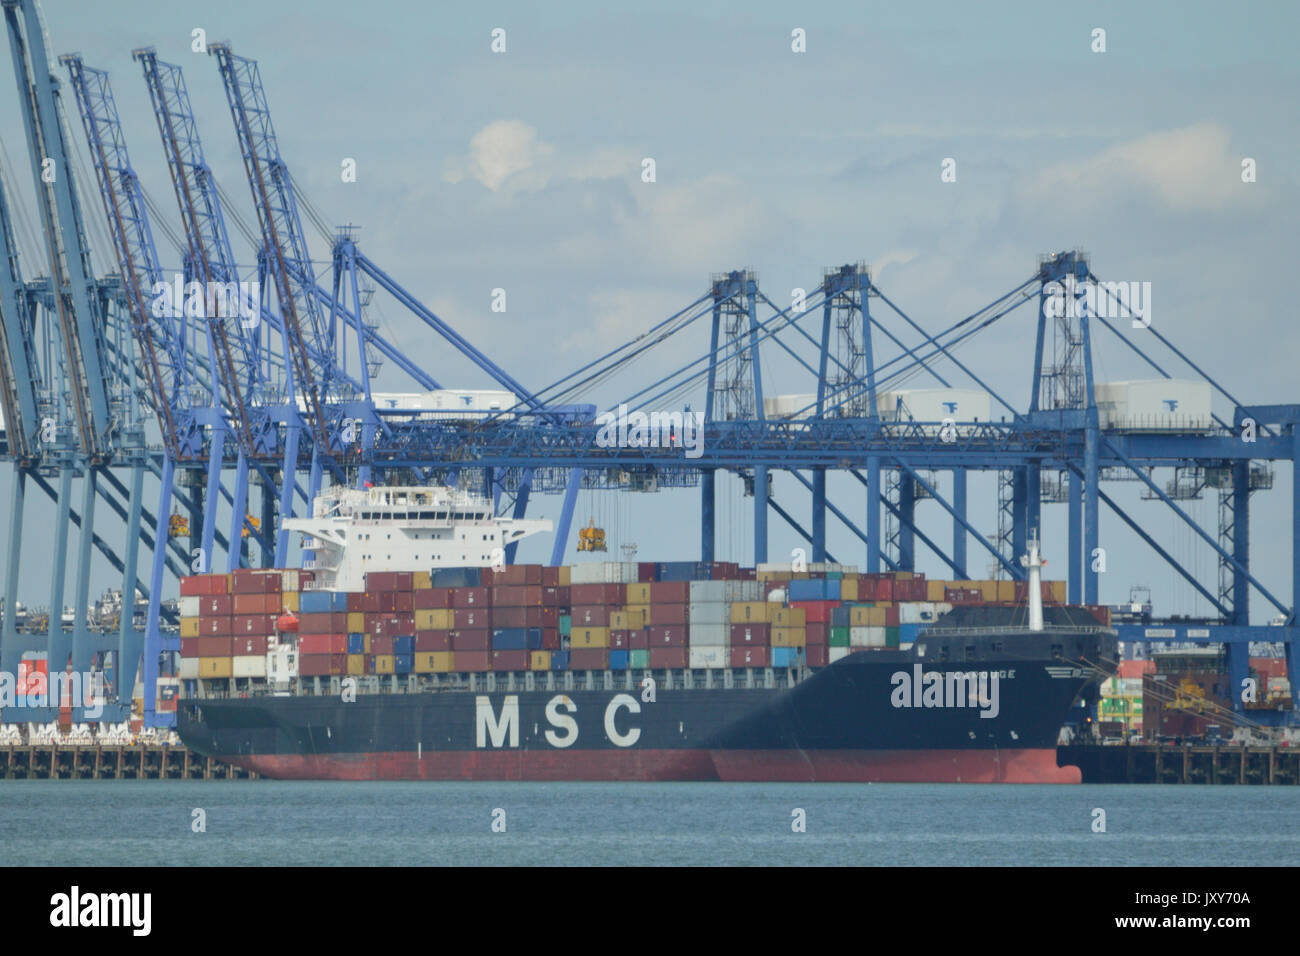 Container Ship MSC Rouge seen alongside at the Port of Felixstowe Stock Photo